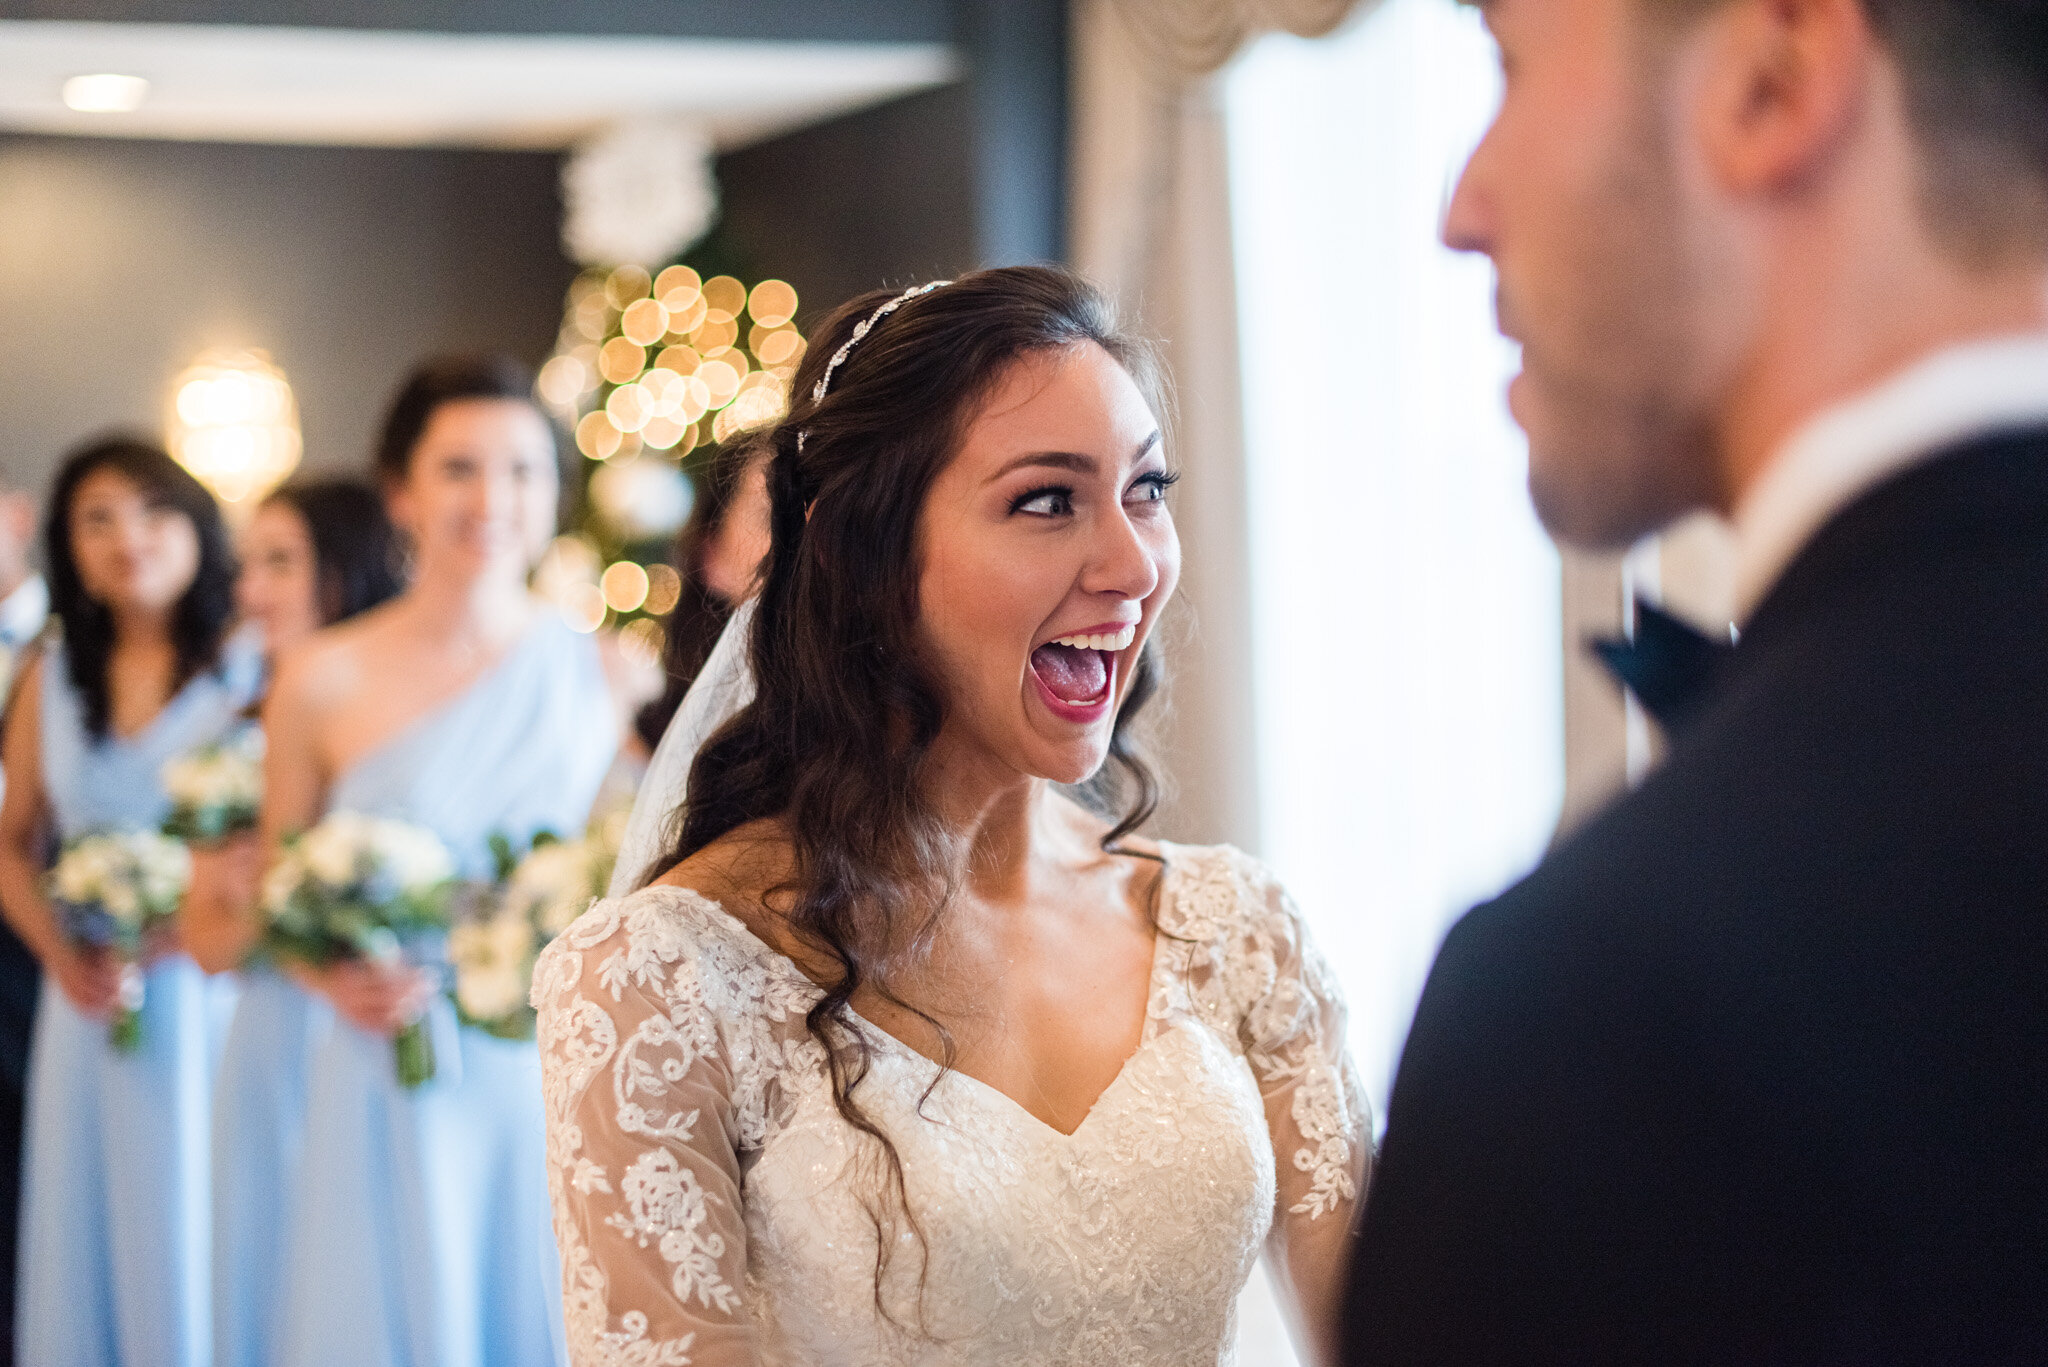 Bride's reaction to being married.